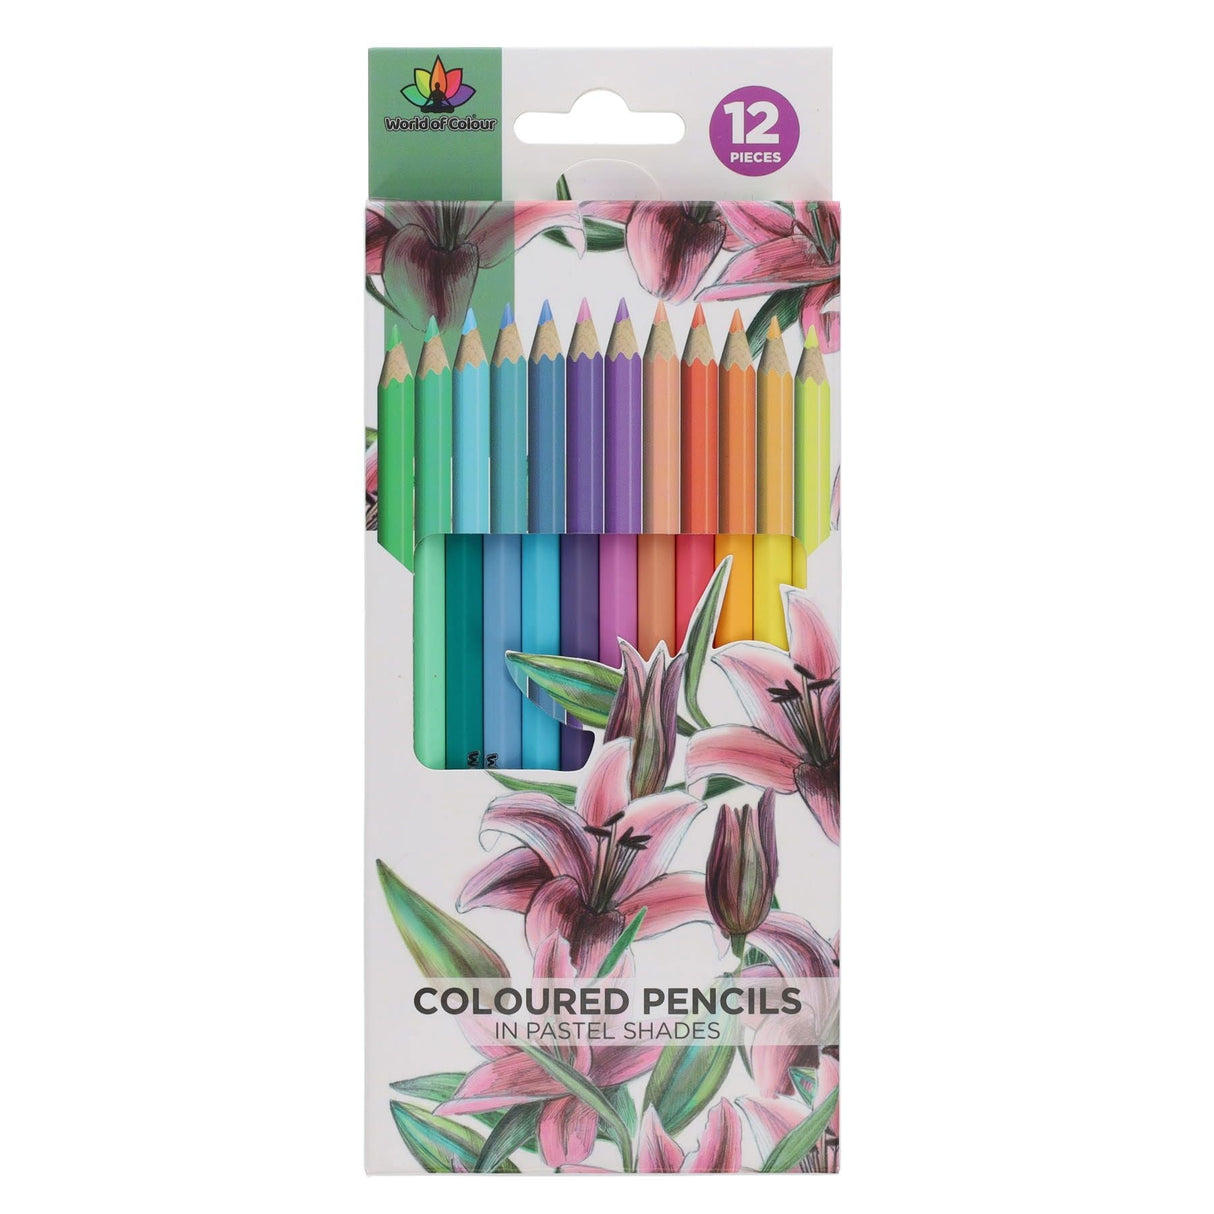 World of Colour Colouring Pencils - Pastel - Pack of 12-Colouring Pencils-World of Colour|StationeryShop.co.uk